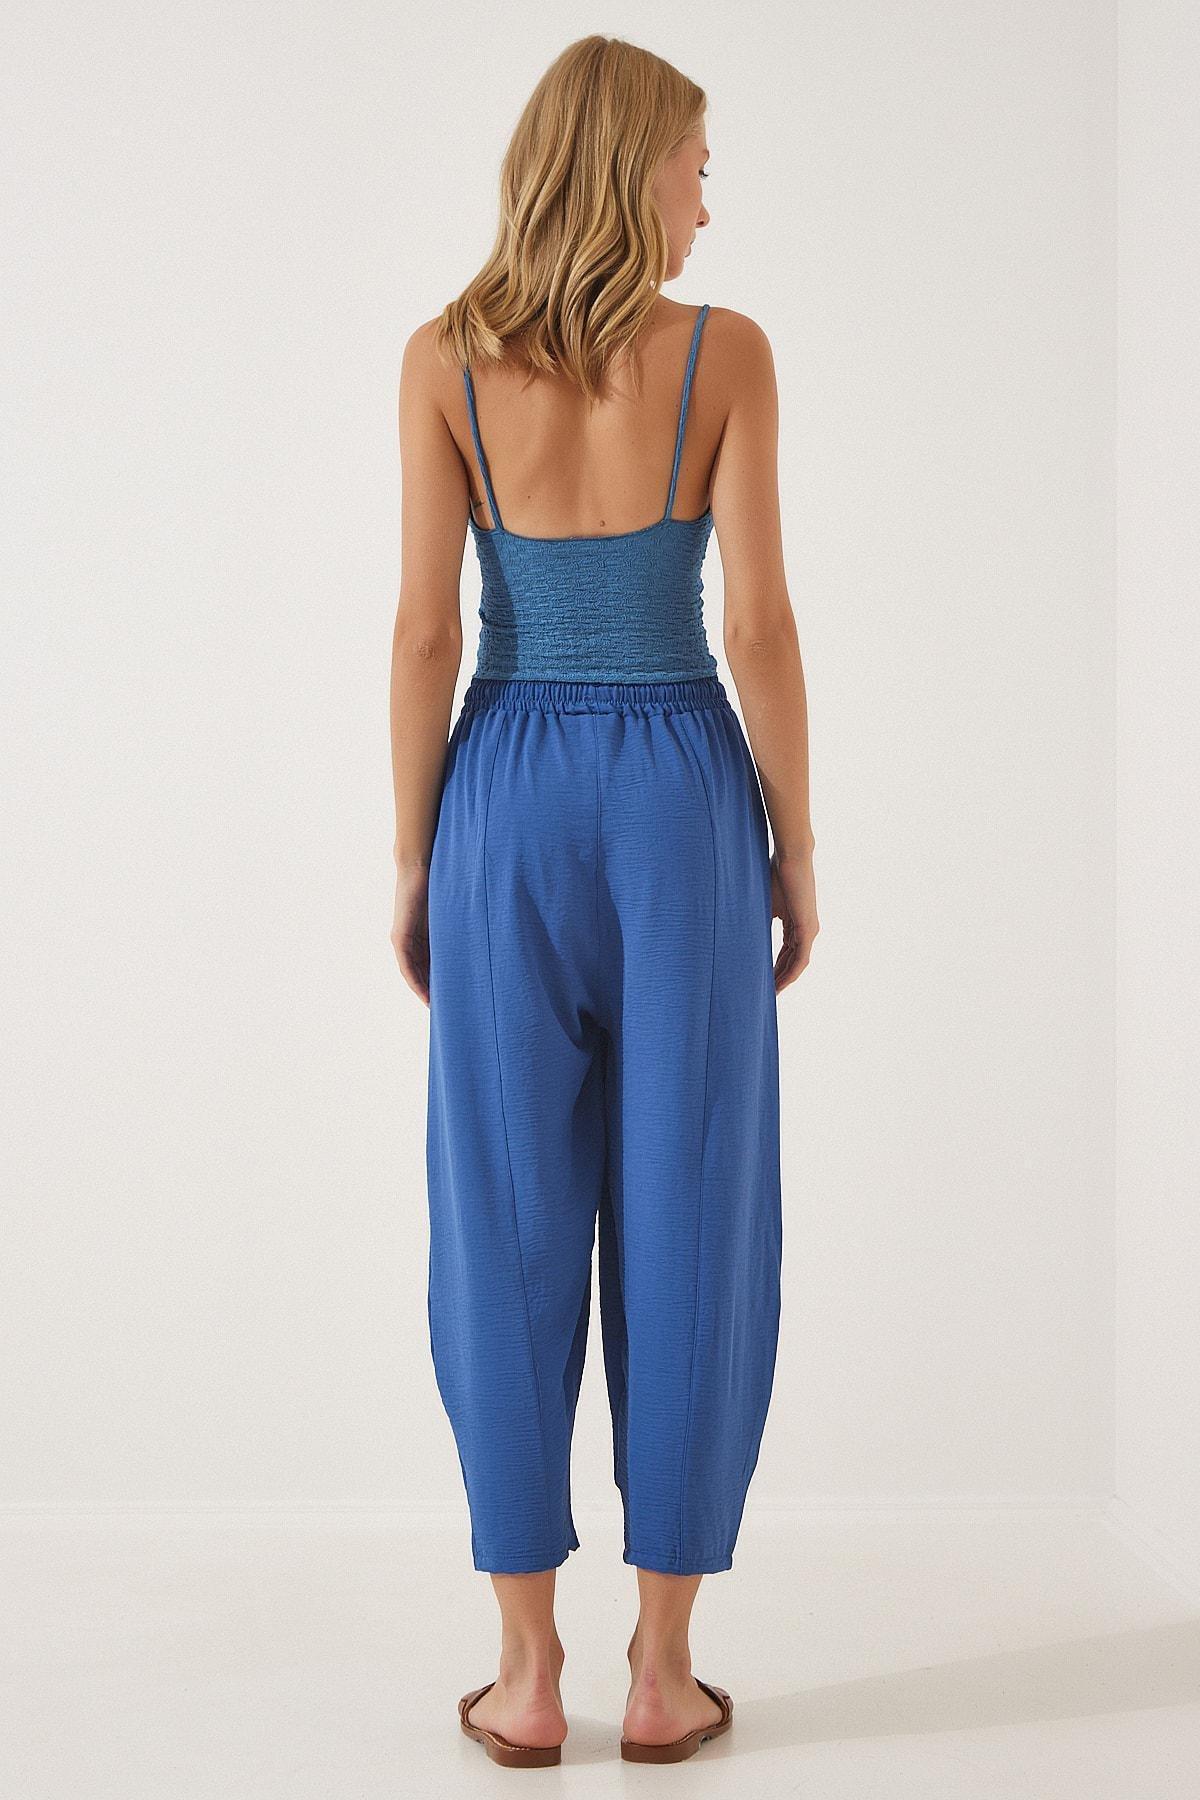 Happiness Istanbul - Navy Mid Waist Carrot Pants